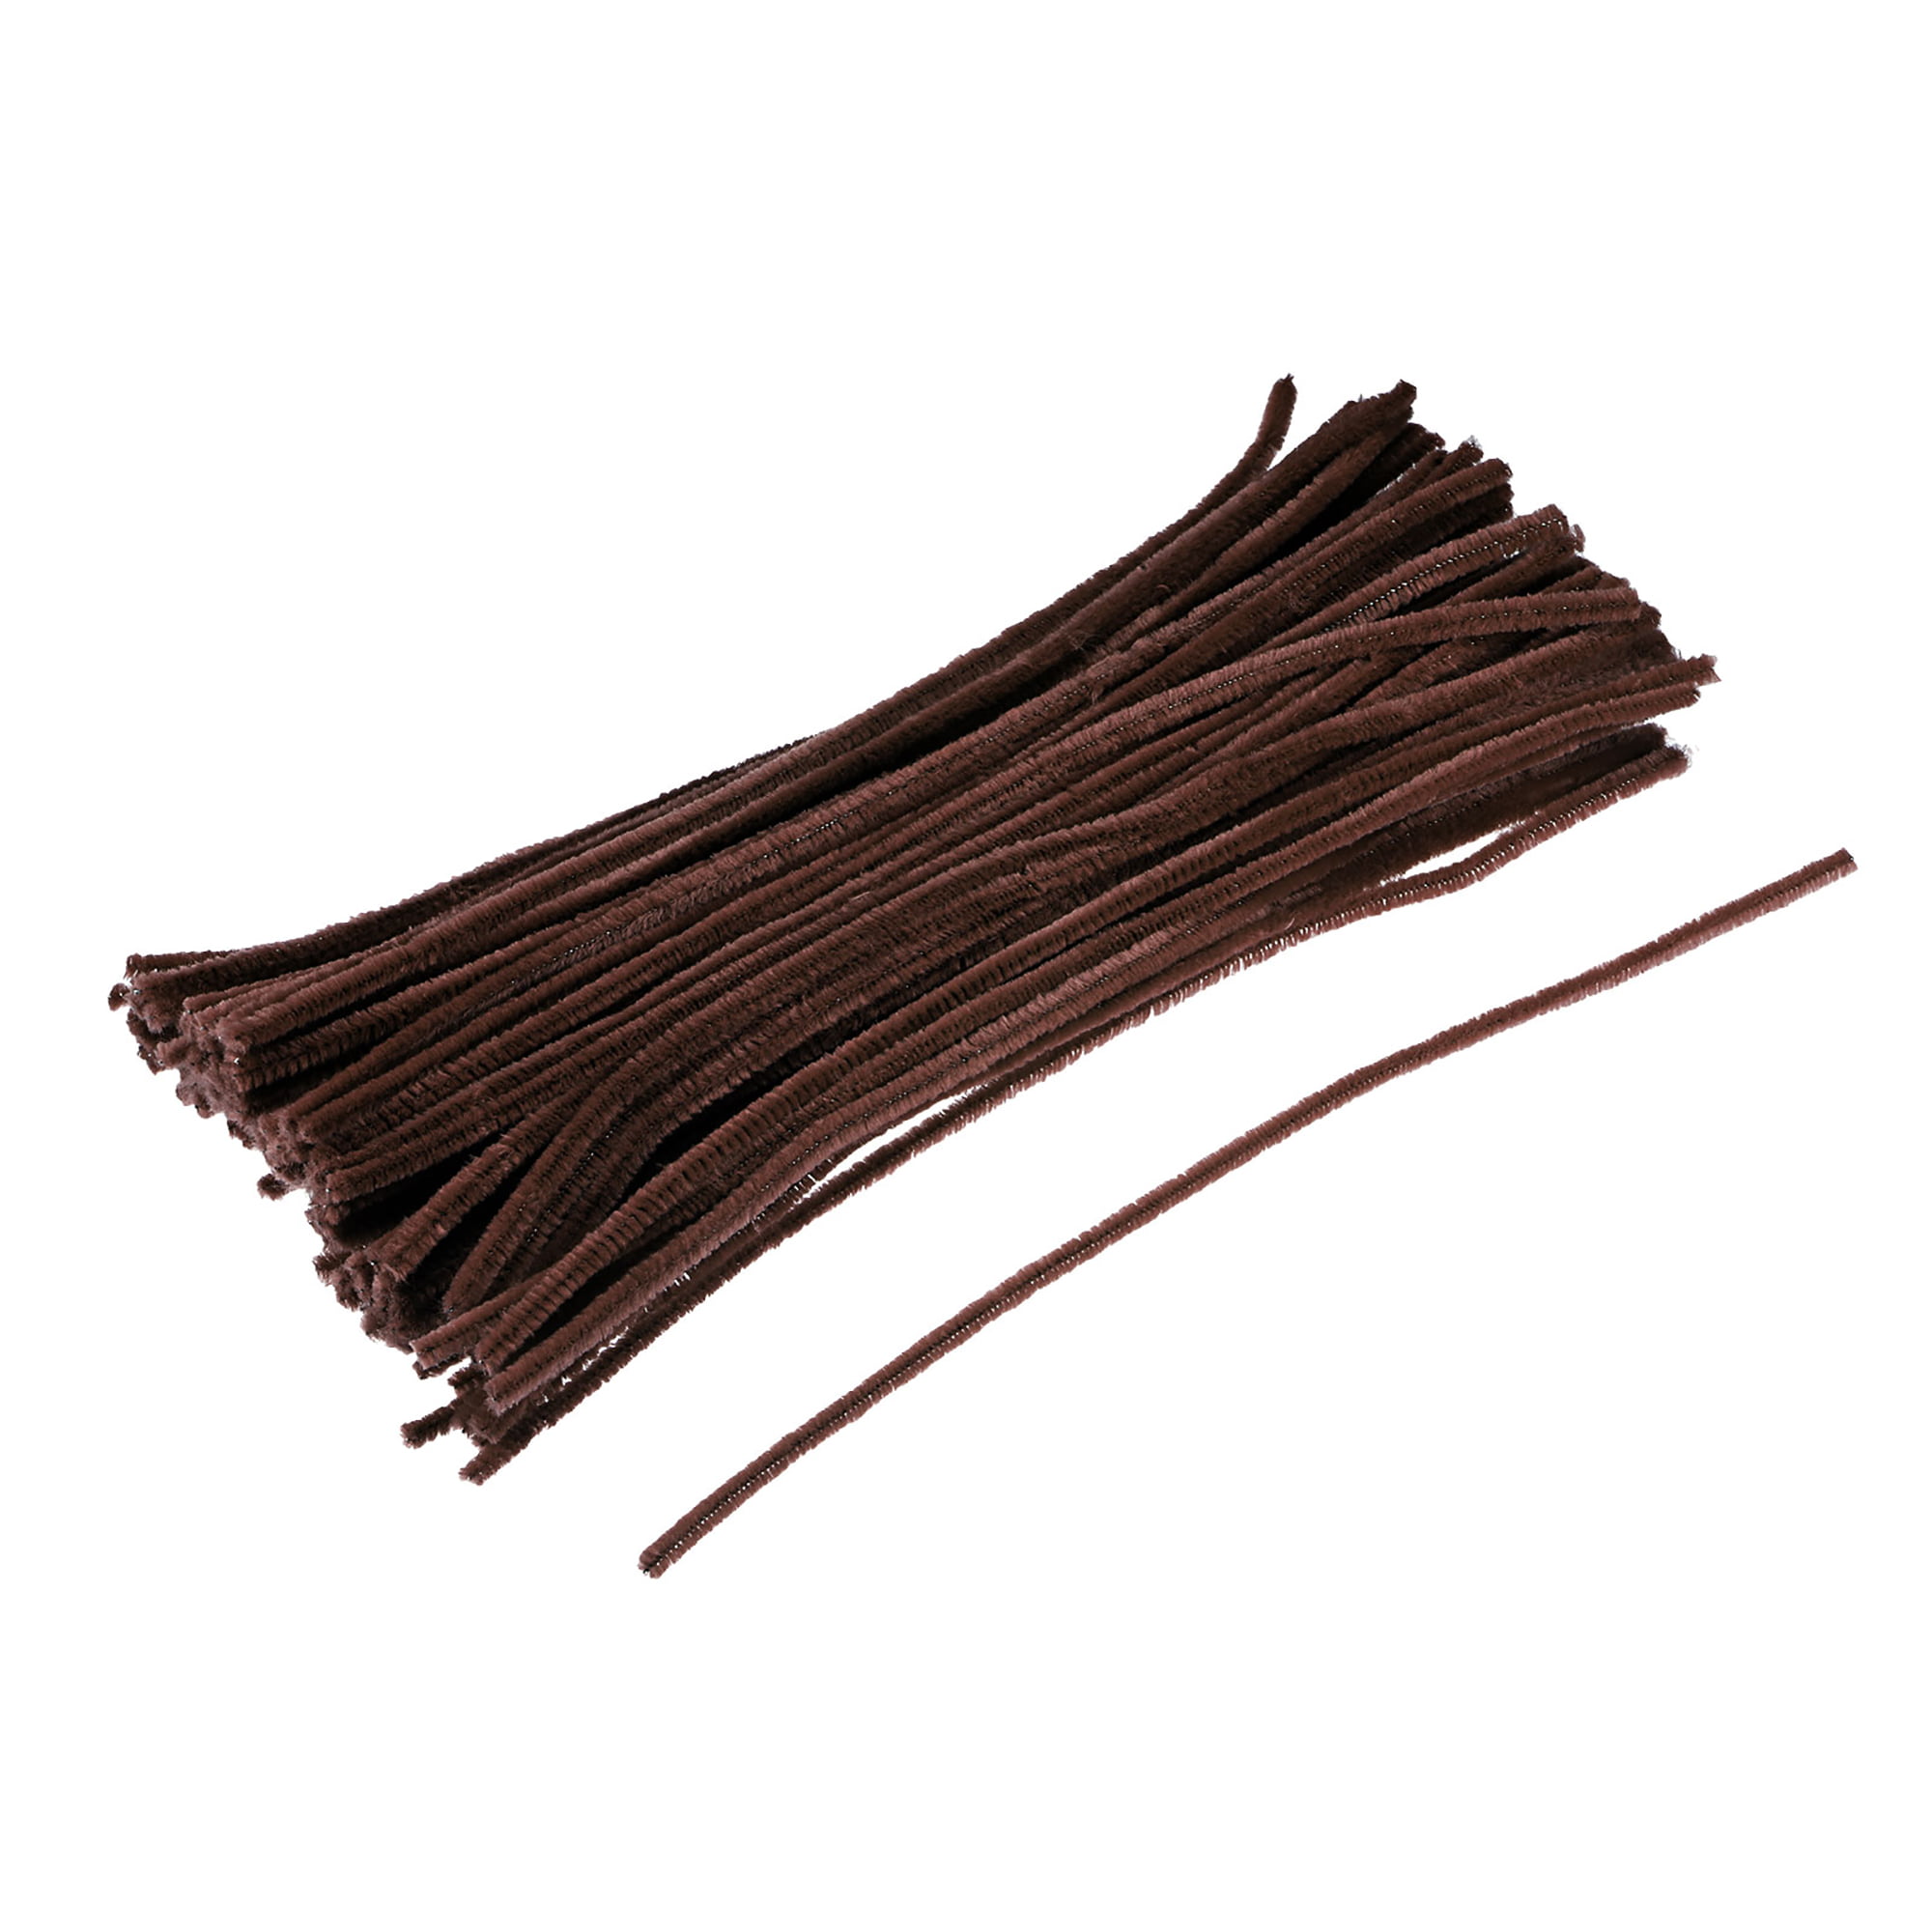 Pack of 350 Chocolate Brown Pipe Cleaners. Fuzzy Stick Chenille Stems for  Arts and Crafts Cats, Dogs and Other Animal Figures - Size: 12 Inches Long  x